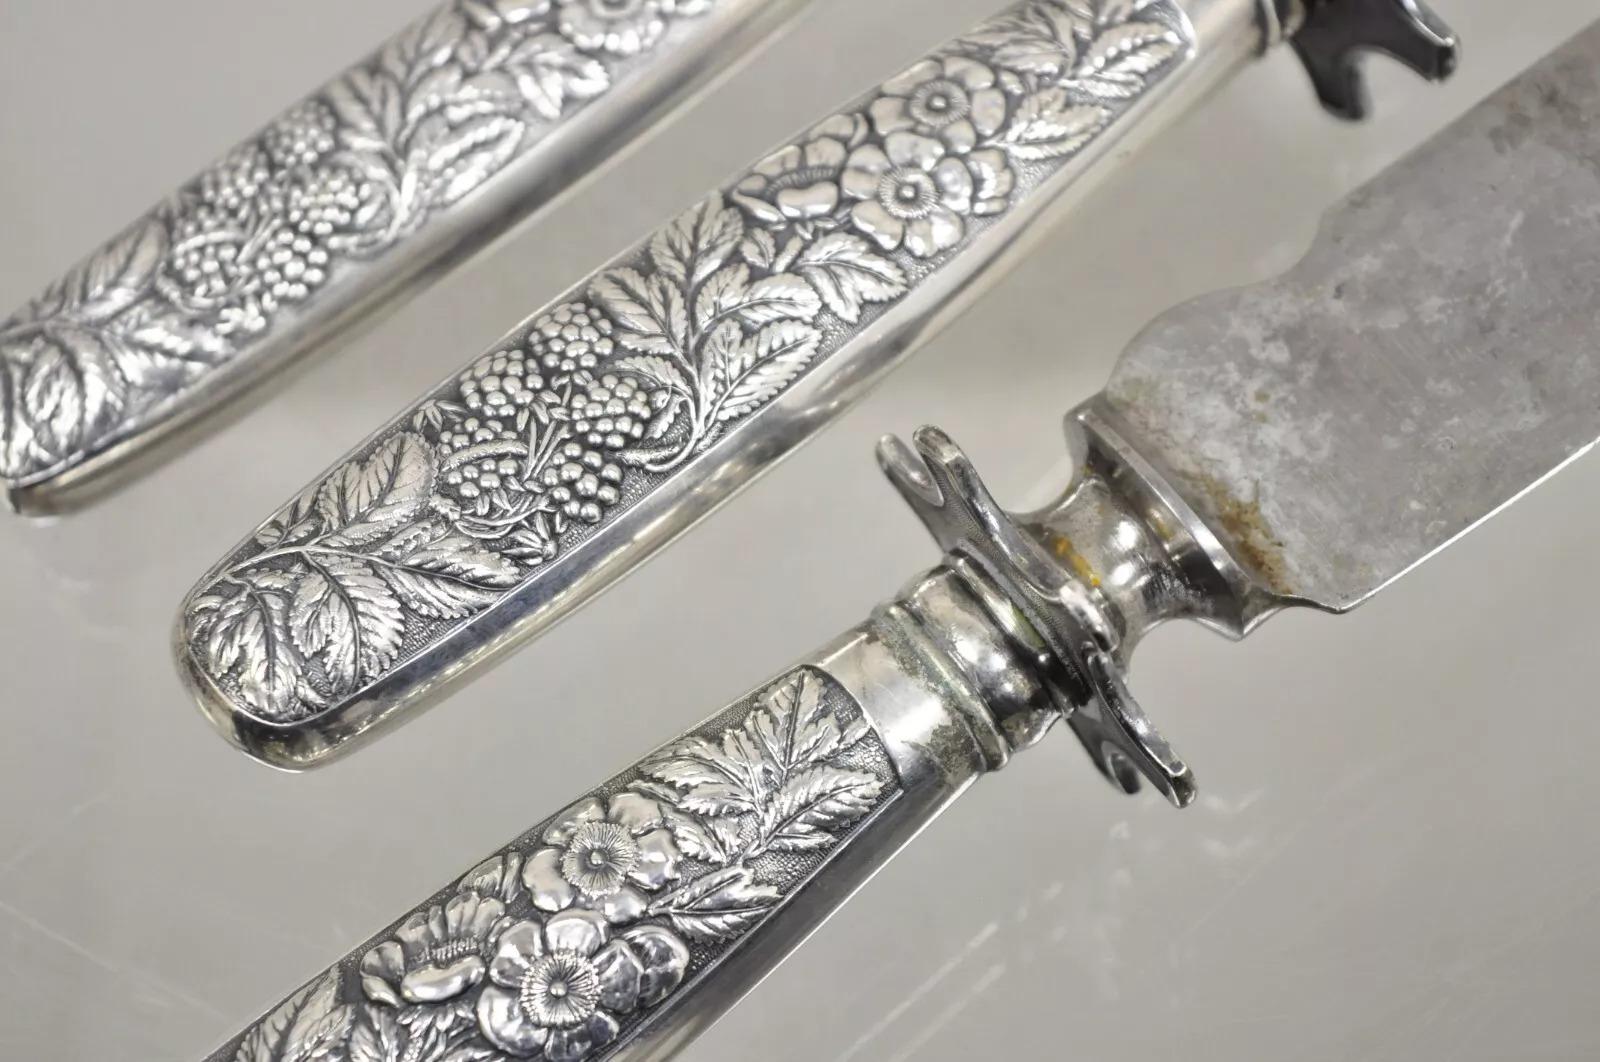 Antique R Wallace & Sons Victorian Silver Plated Repousse Meat Carving Set - 3Pc For Sale 6